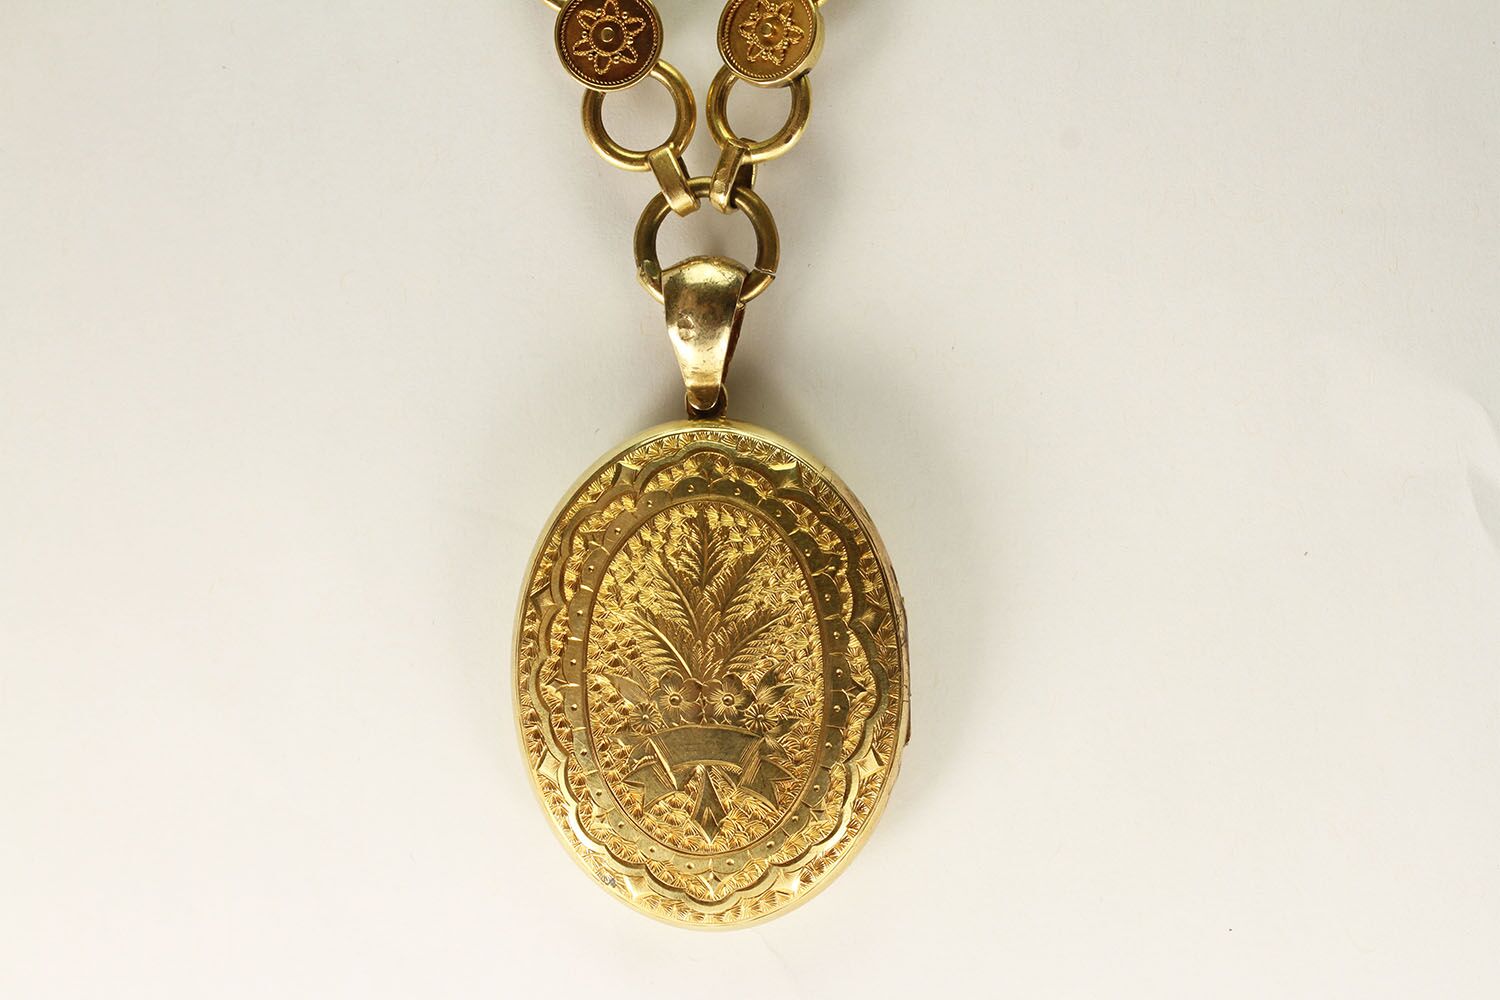 Victorian Gold Locket and Chain, 45x35mm oval locket, floral engraved detail, fancy link period